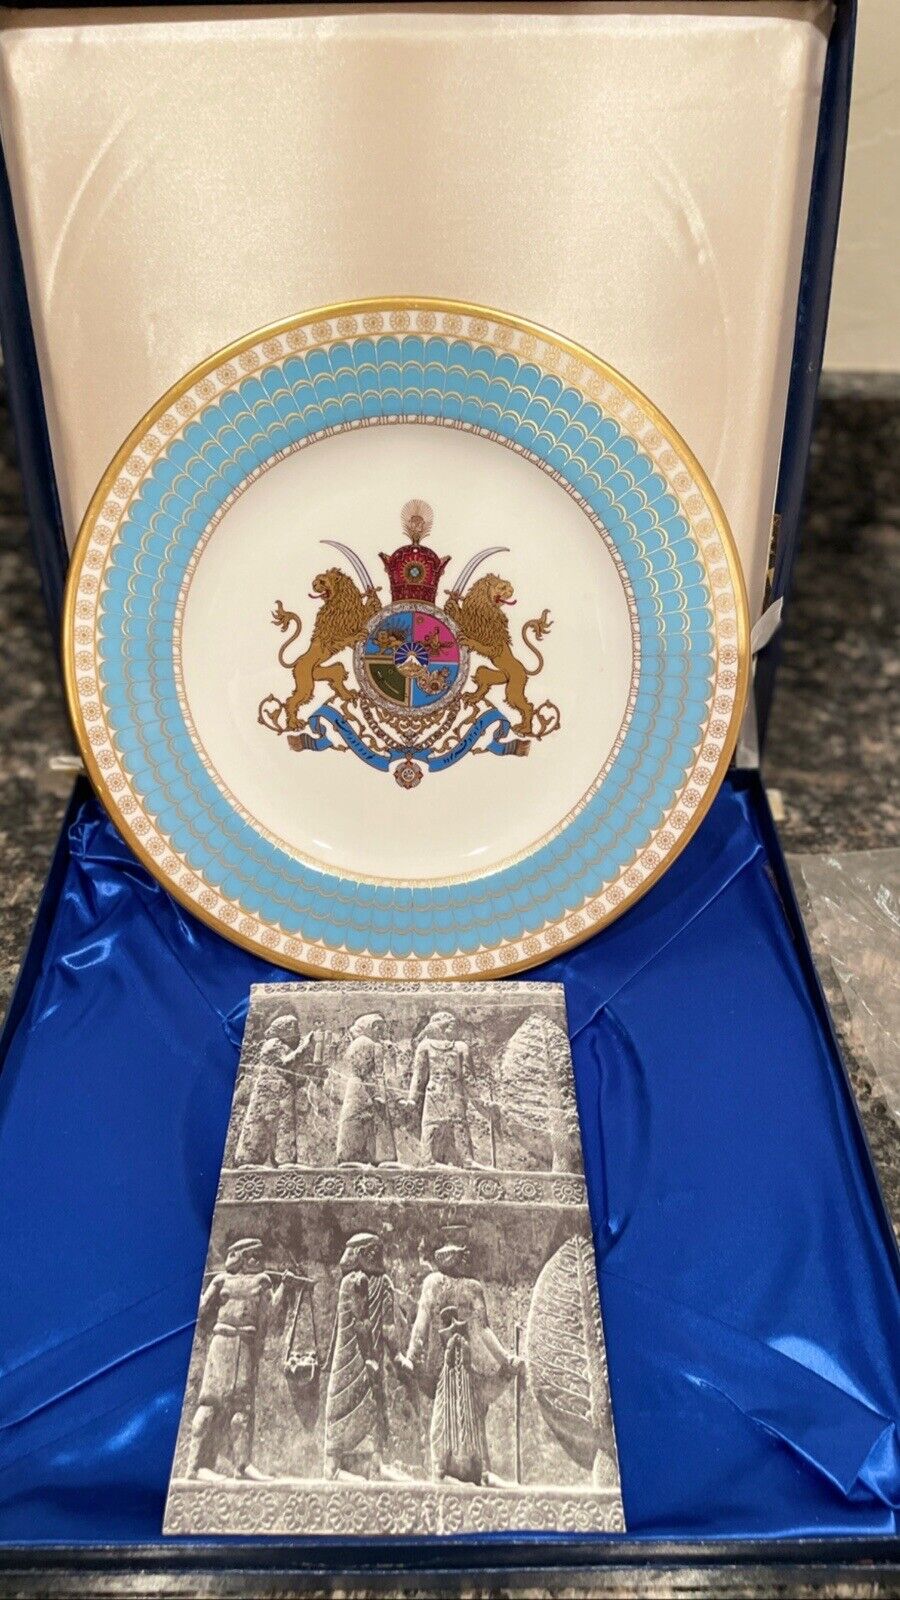 1971 Limited Edition Spode Imperial Plate Persia Shah Pahlavi - Only 10,000 Made